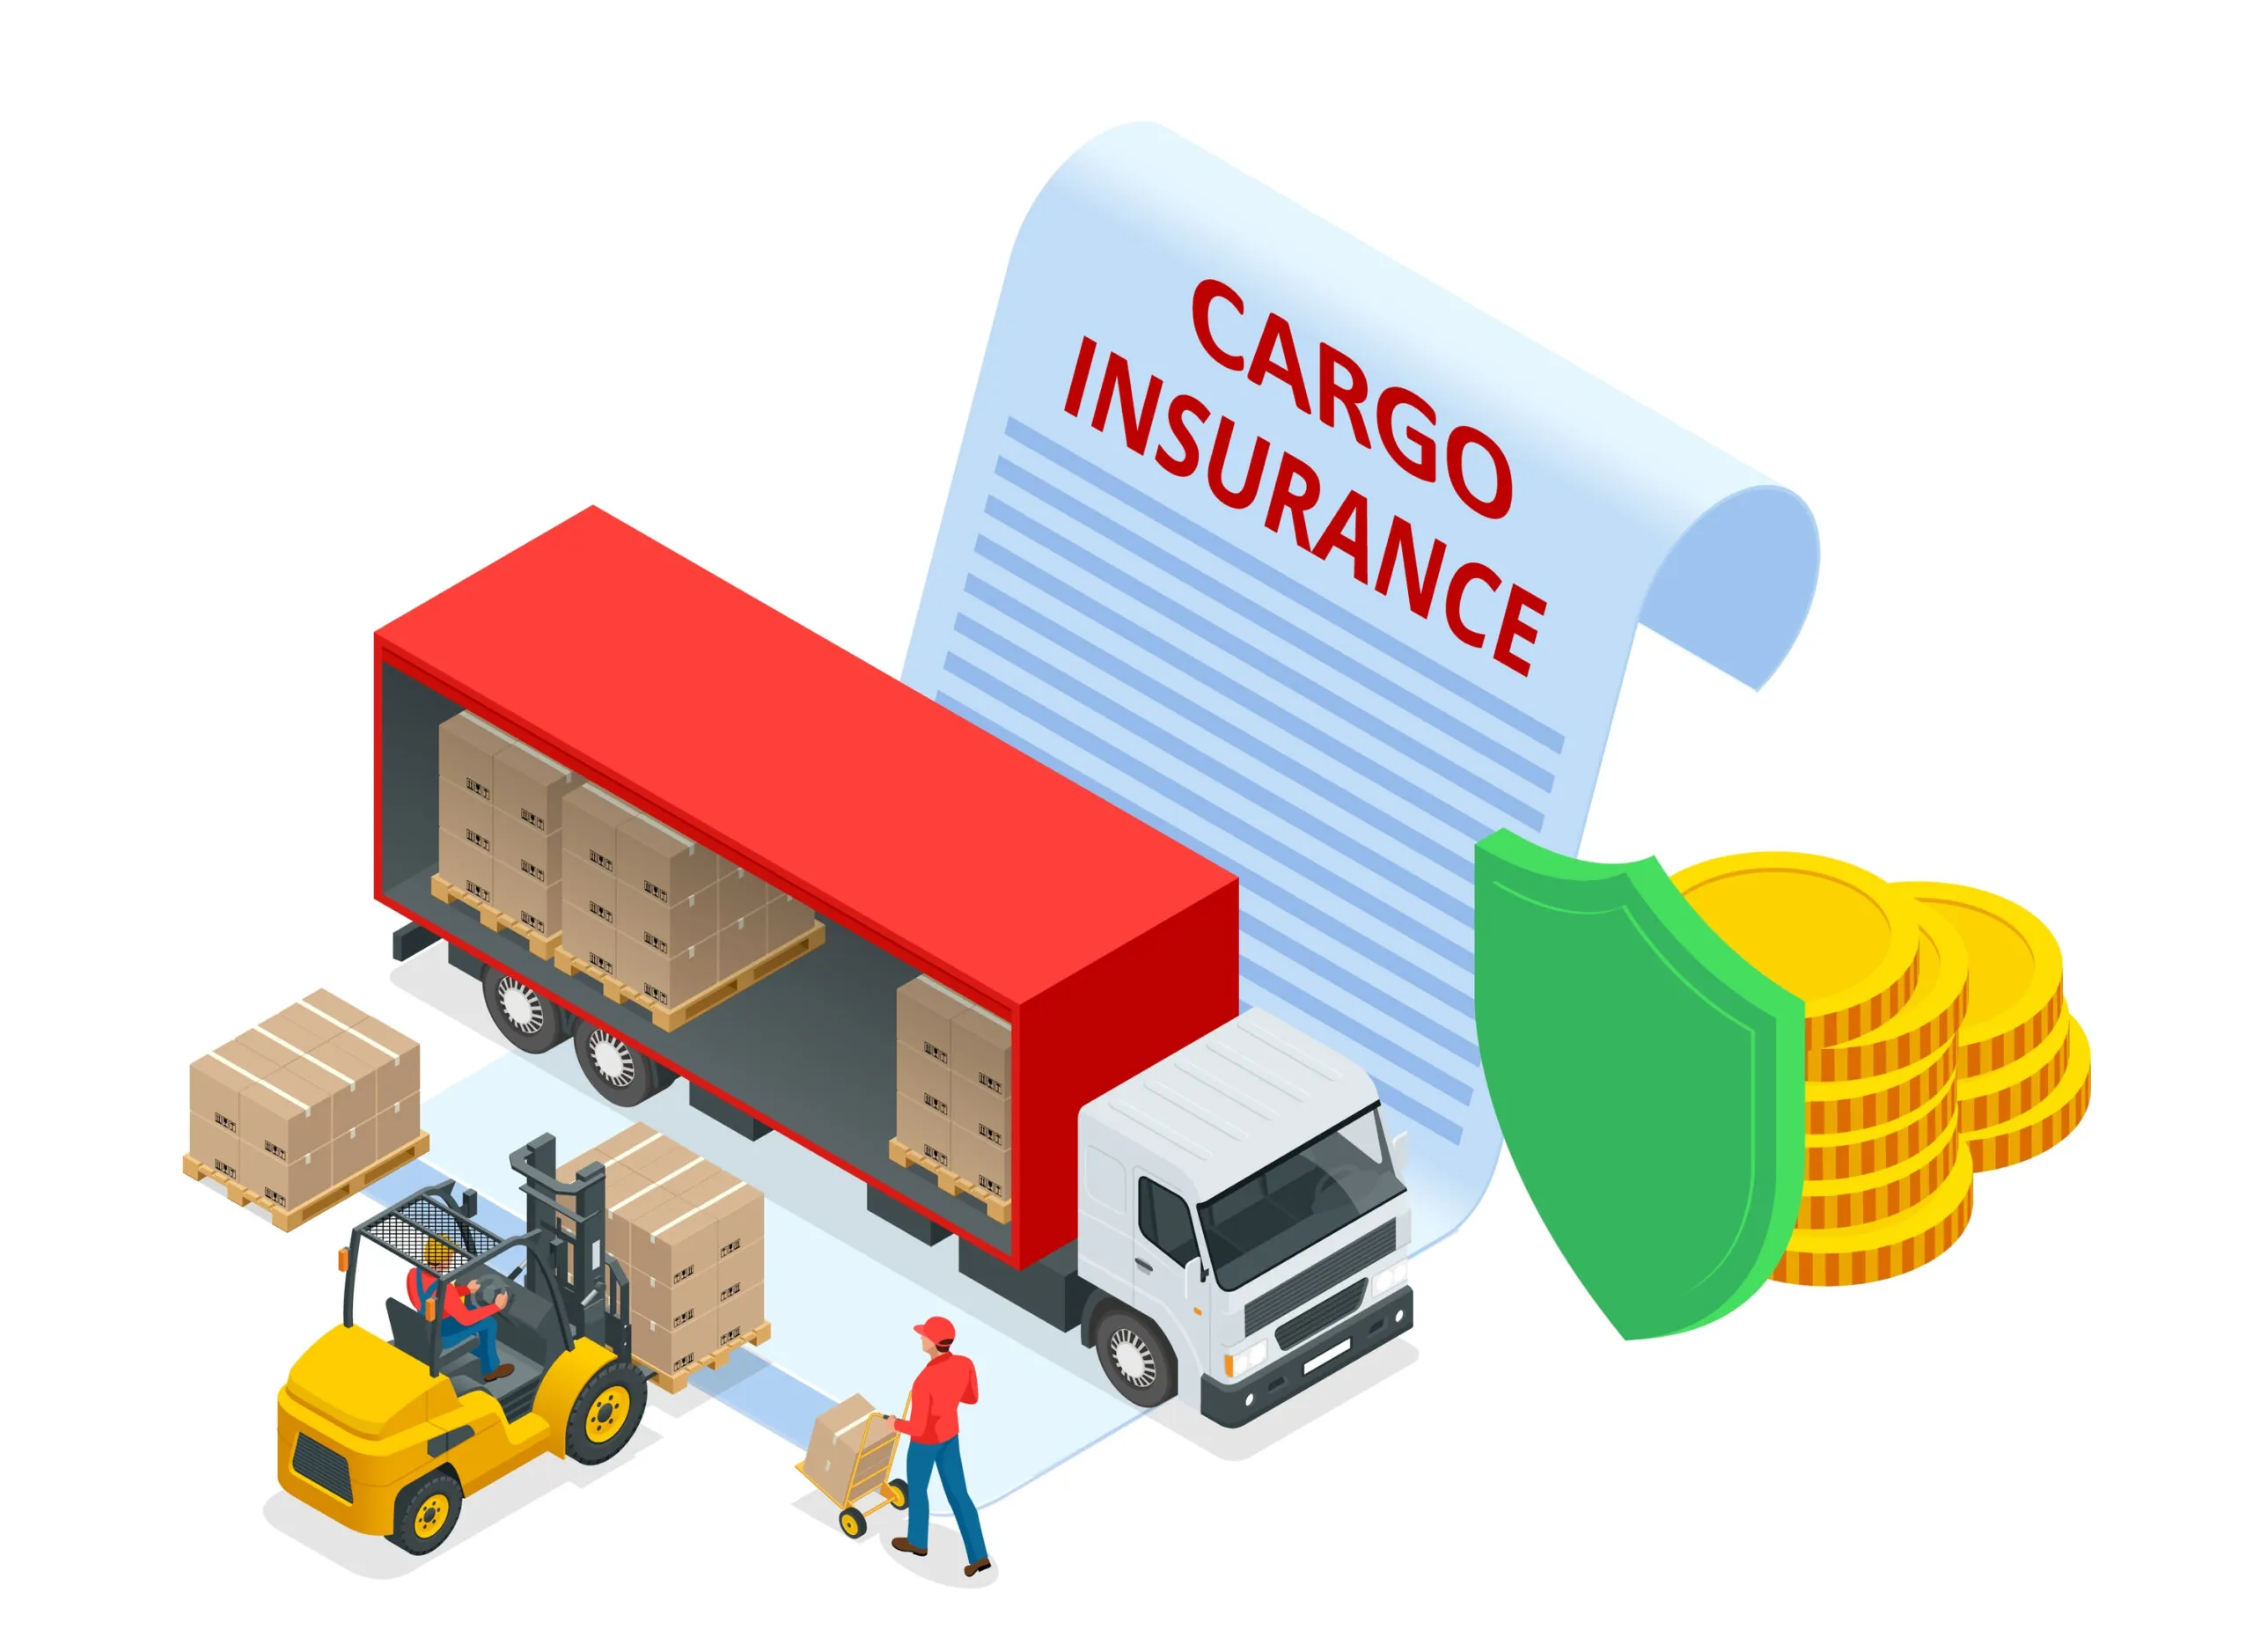 cargo insurance illustration with a truck and forklift loading pallets